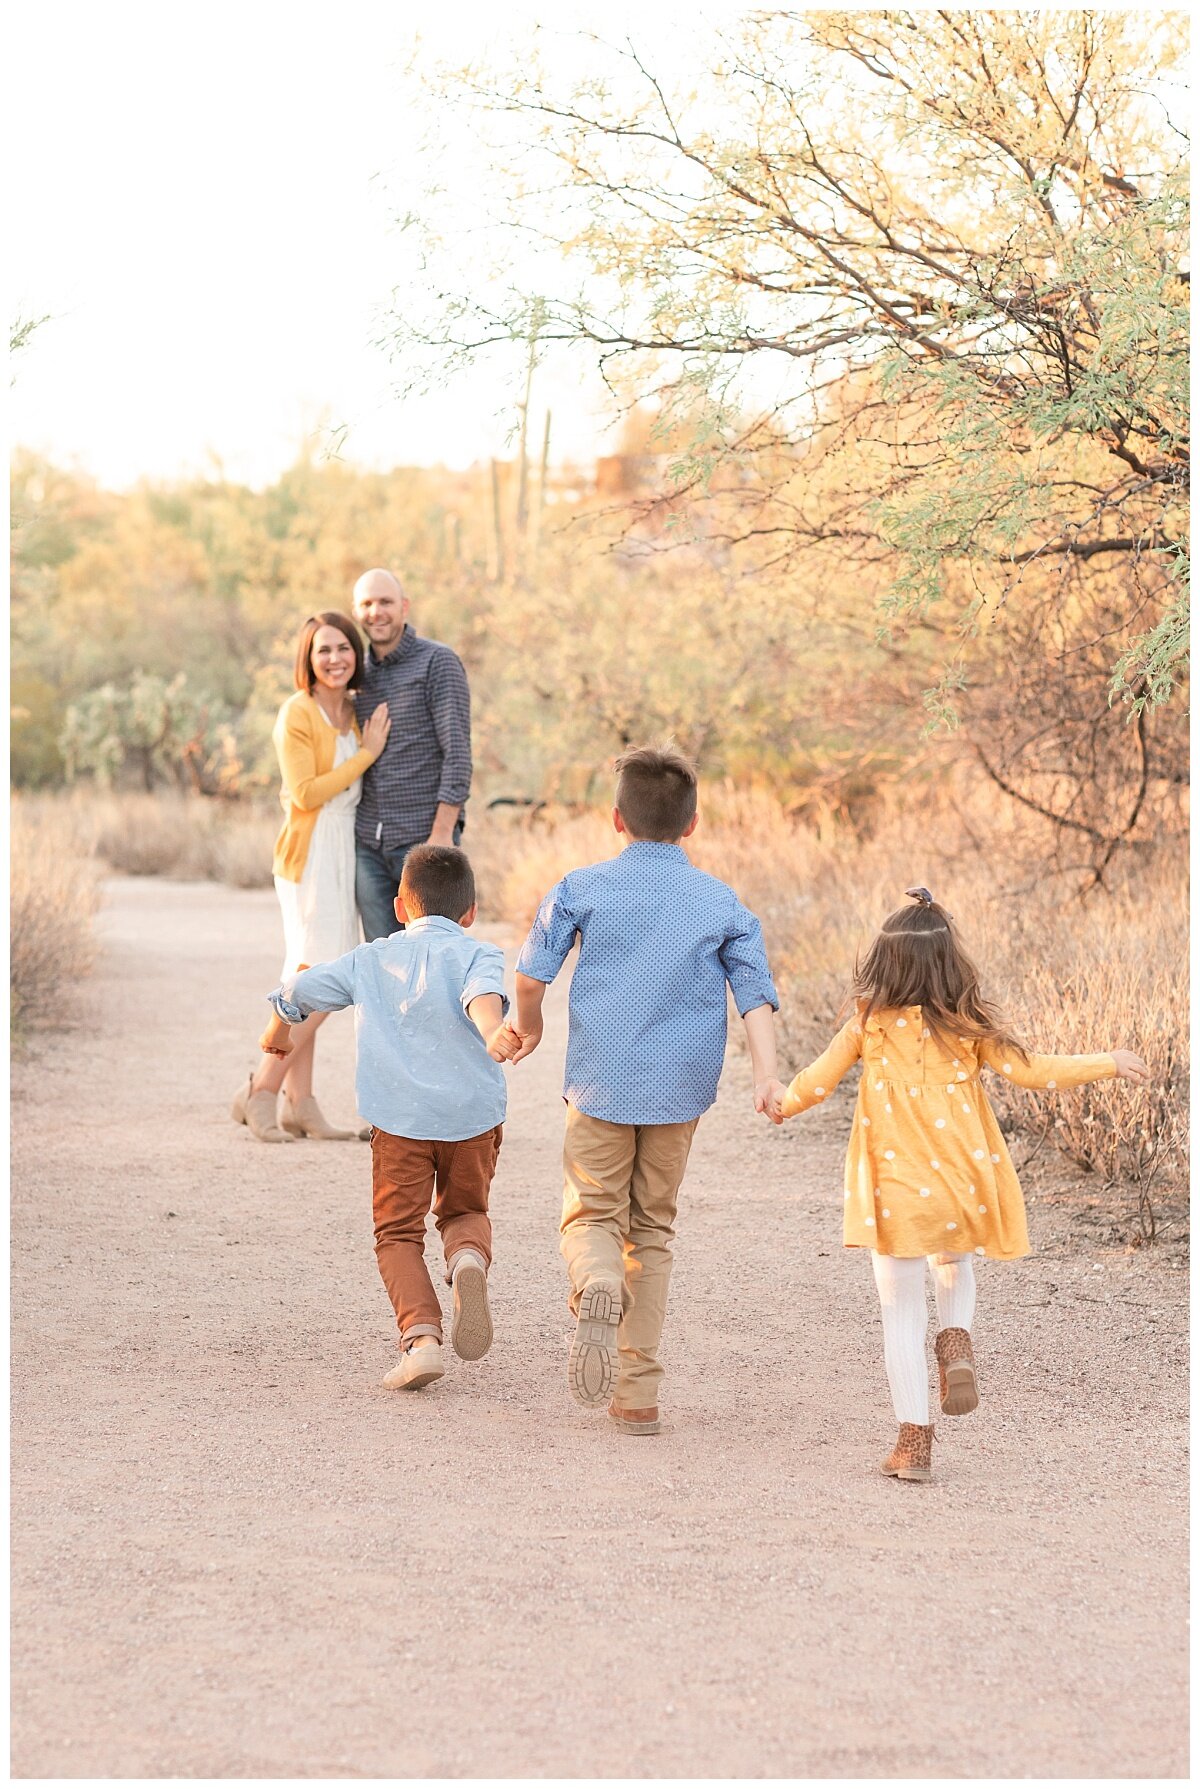 Joyful Family Pictures captured by Melissa Fritzsche Photograpy in Tucson, Arizona.